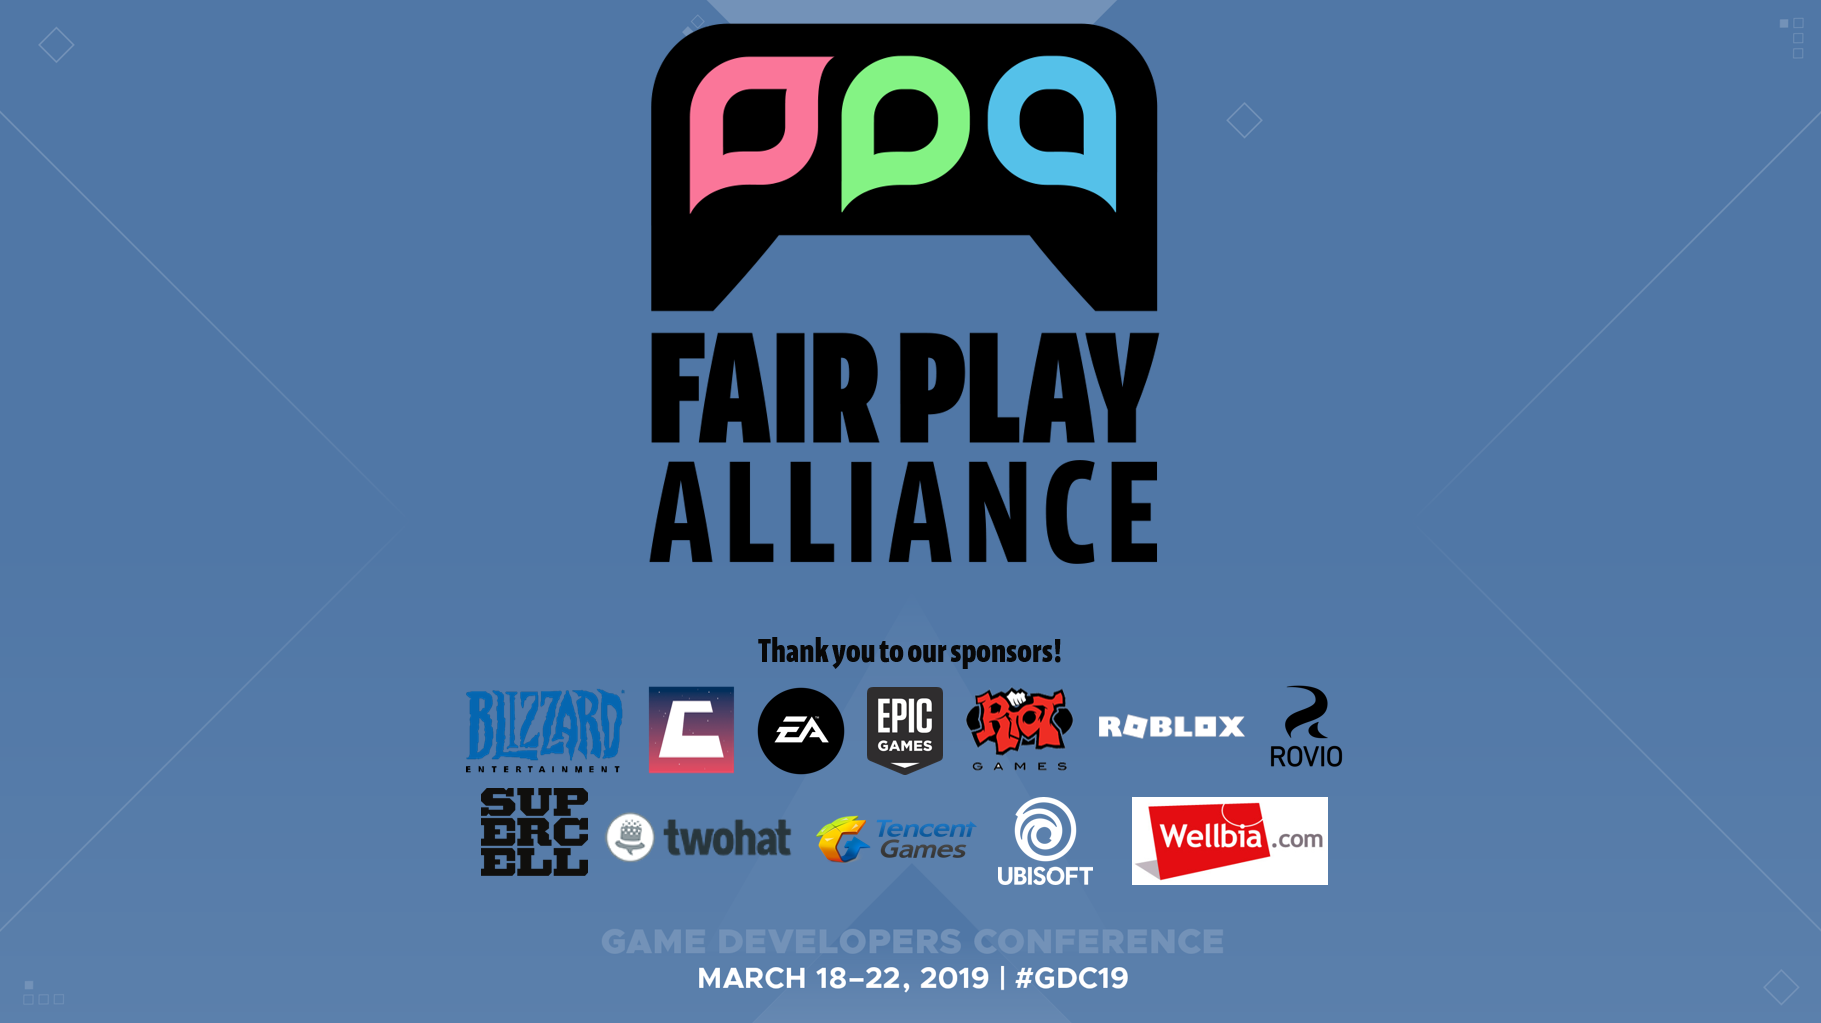 Impact Of Social Systems And Game Design On Player Interactions Gdc 2019 Fair Play Alliance - allies and enemie game systems roblox